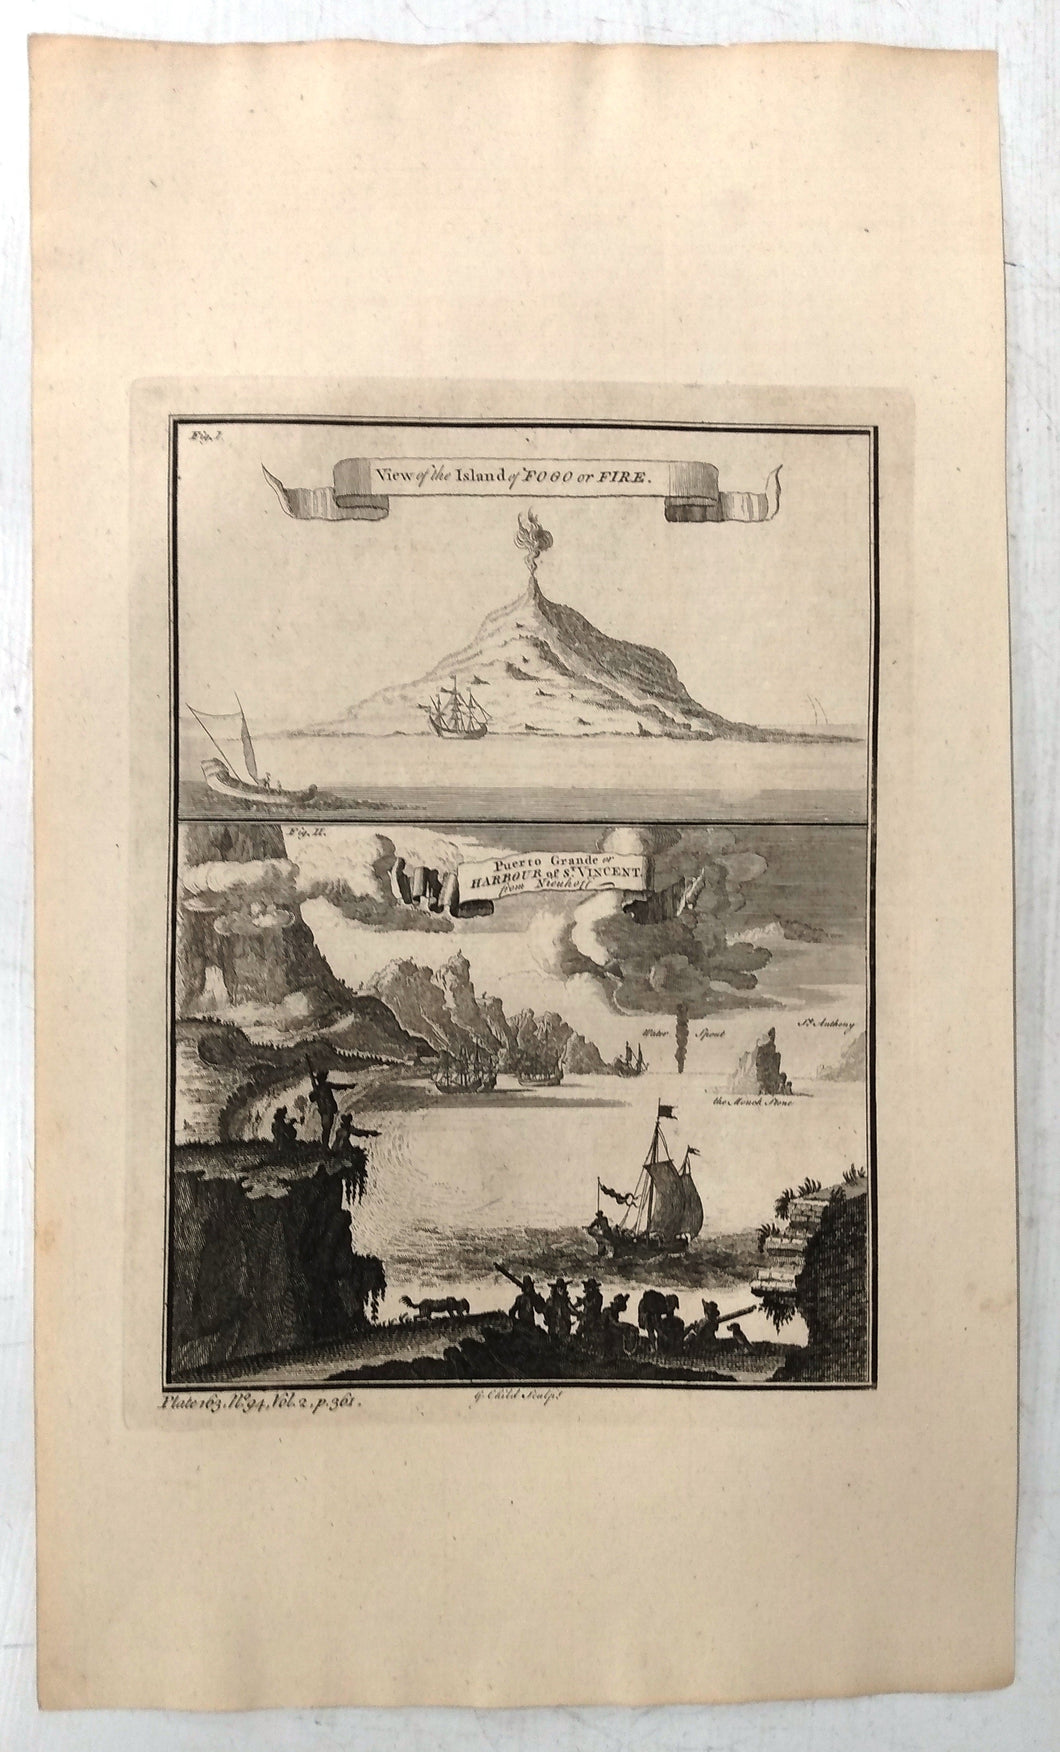 View of the Island of Fogo or Fire; Puerto Grande or Harbour of St. Vincent, from Nieuhoff